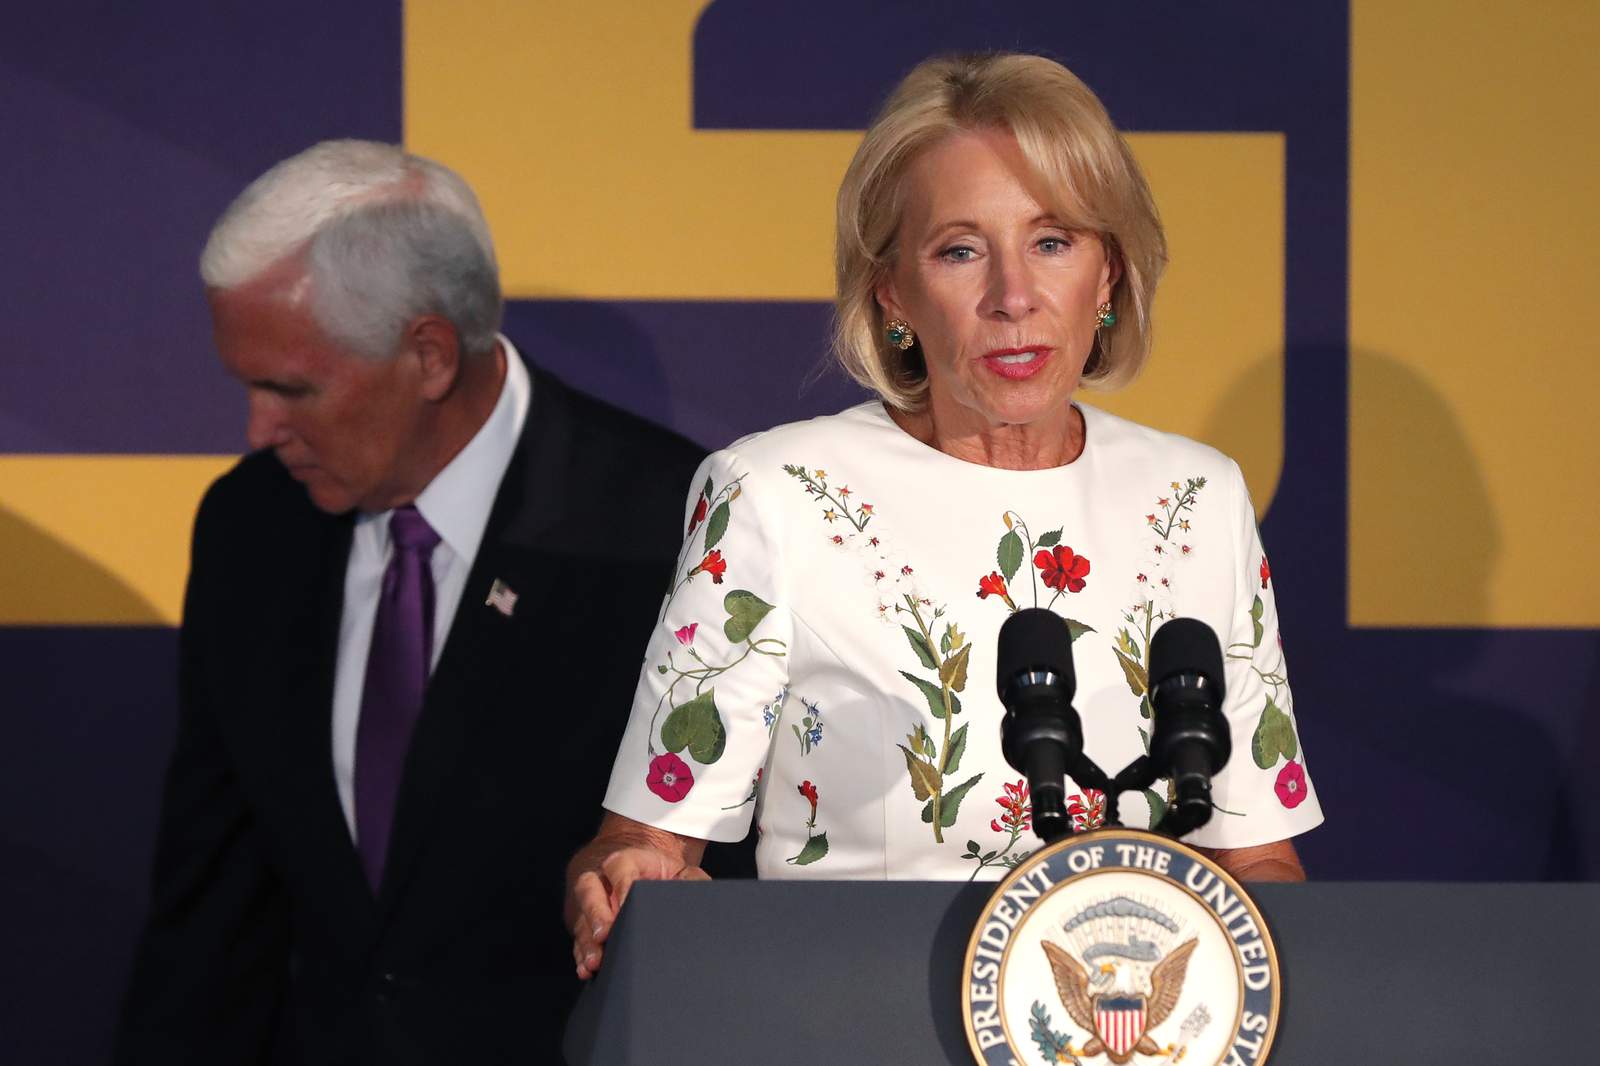 23 AGs sue DeVos over student loan forgiveness policy